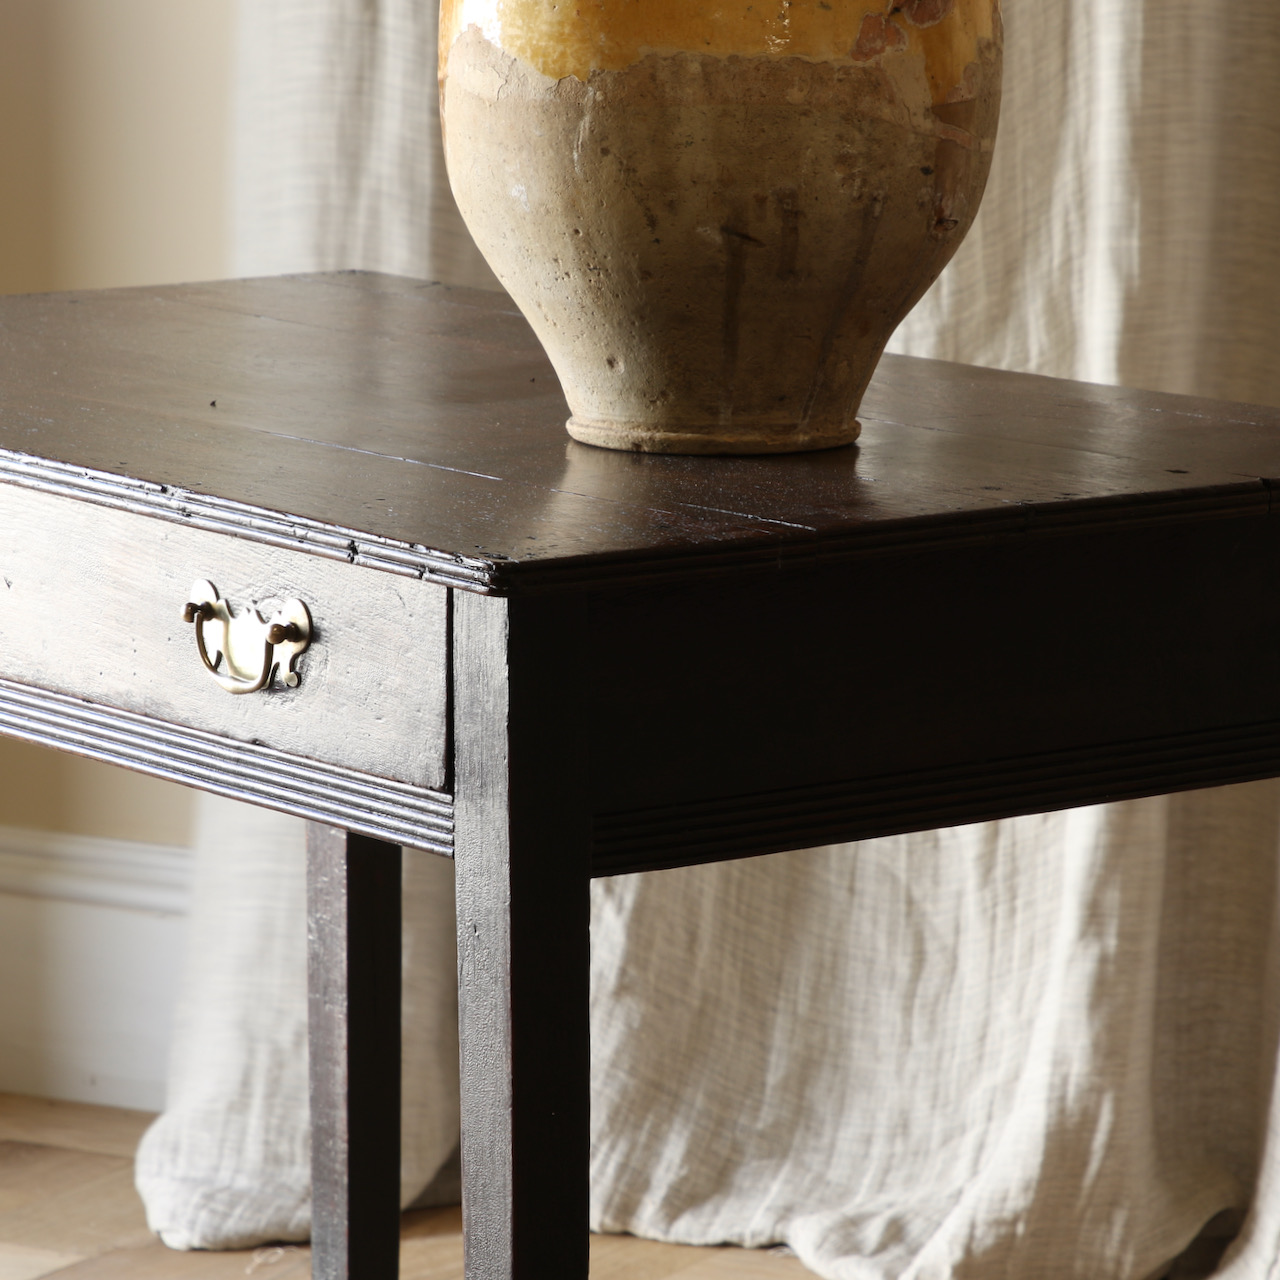 Single Drawer Side Table